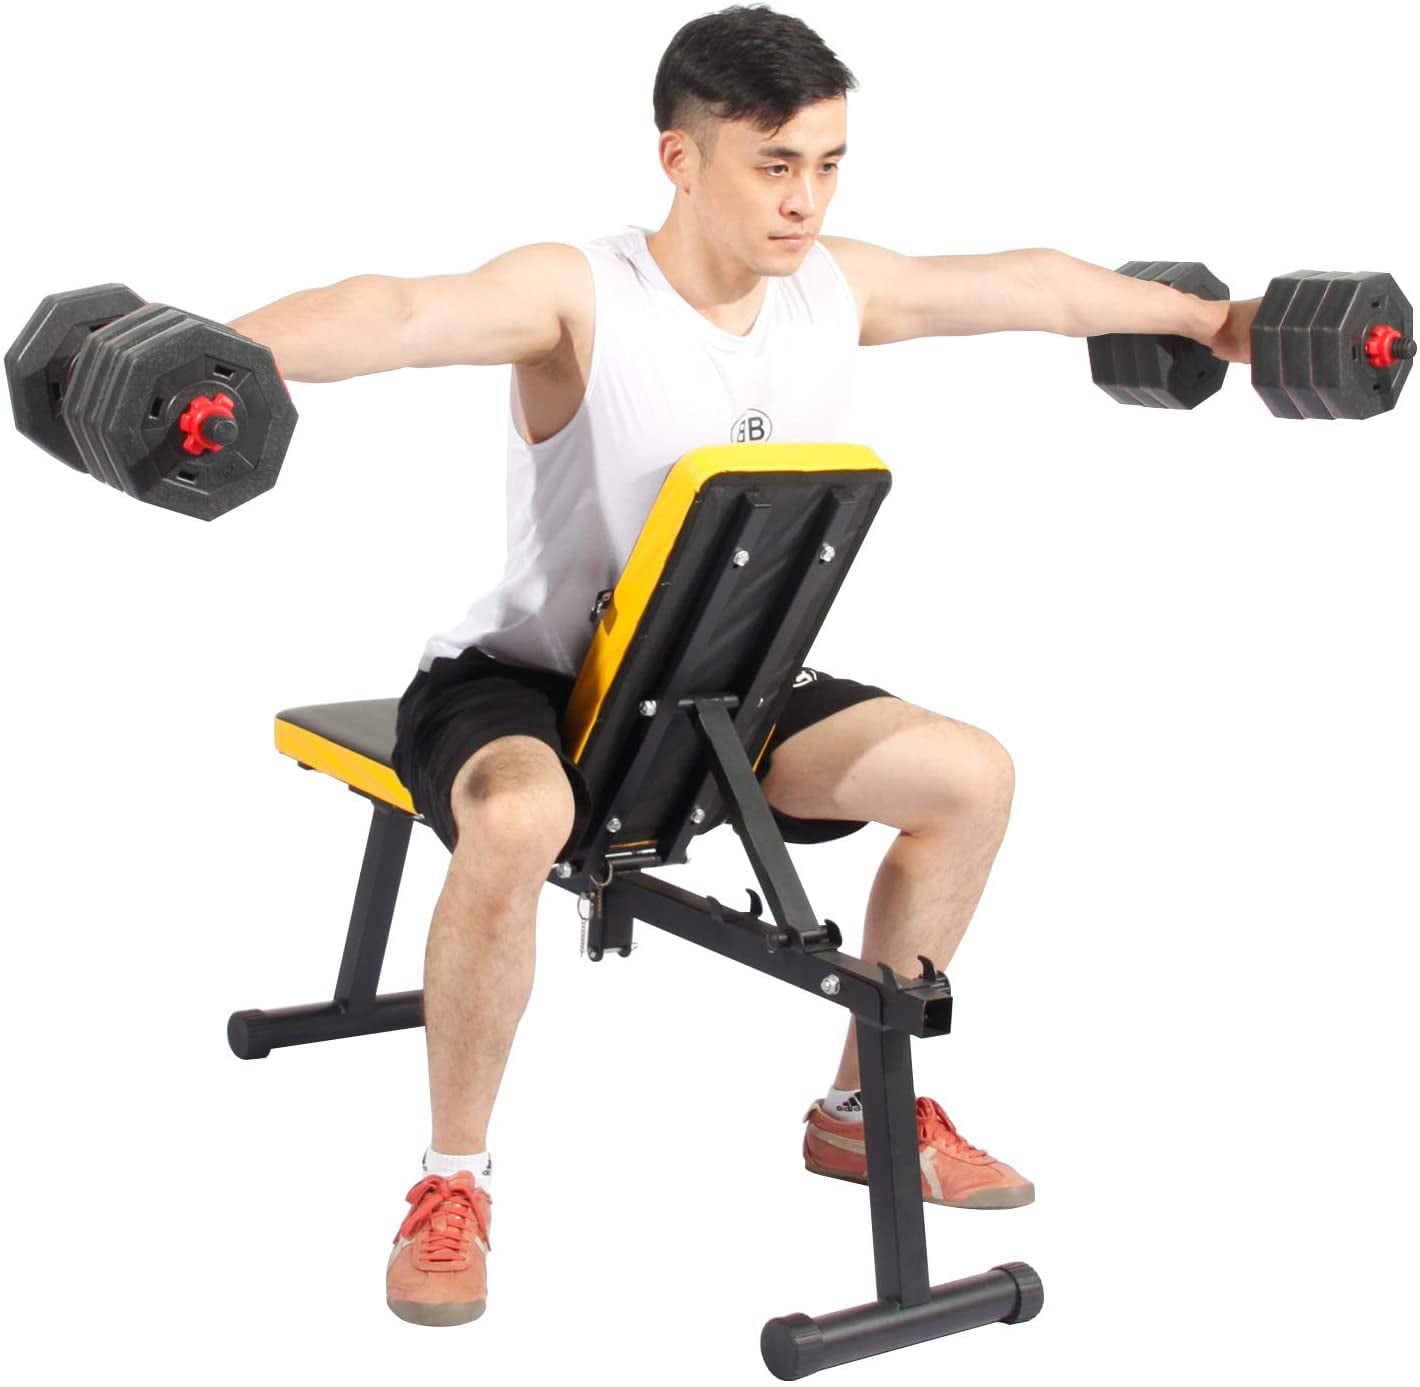 126x40.5x52 cm SogesPower foldable weight bench bench Multifunctional weight benches Training bench for strength training at home 